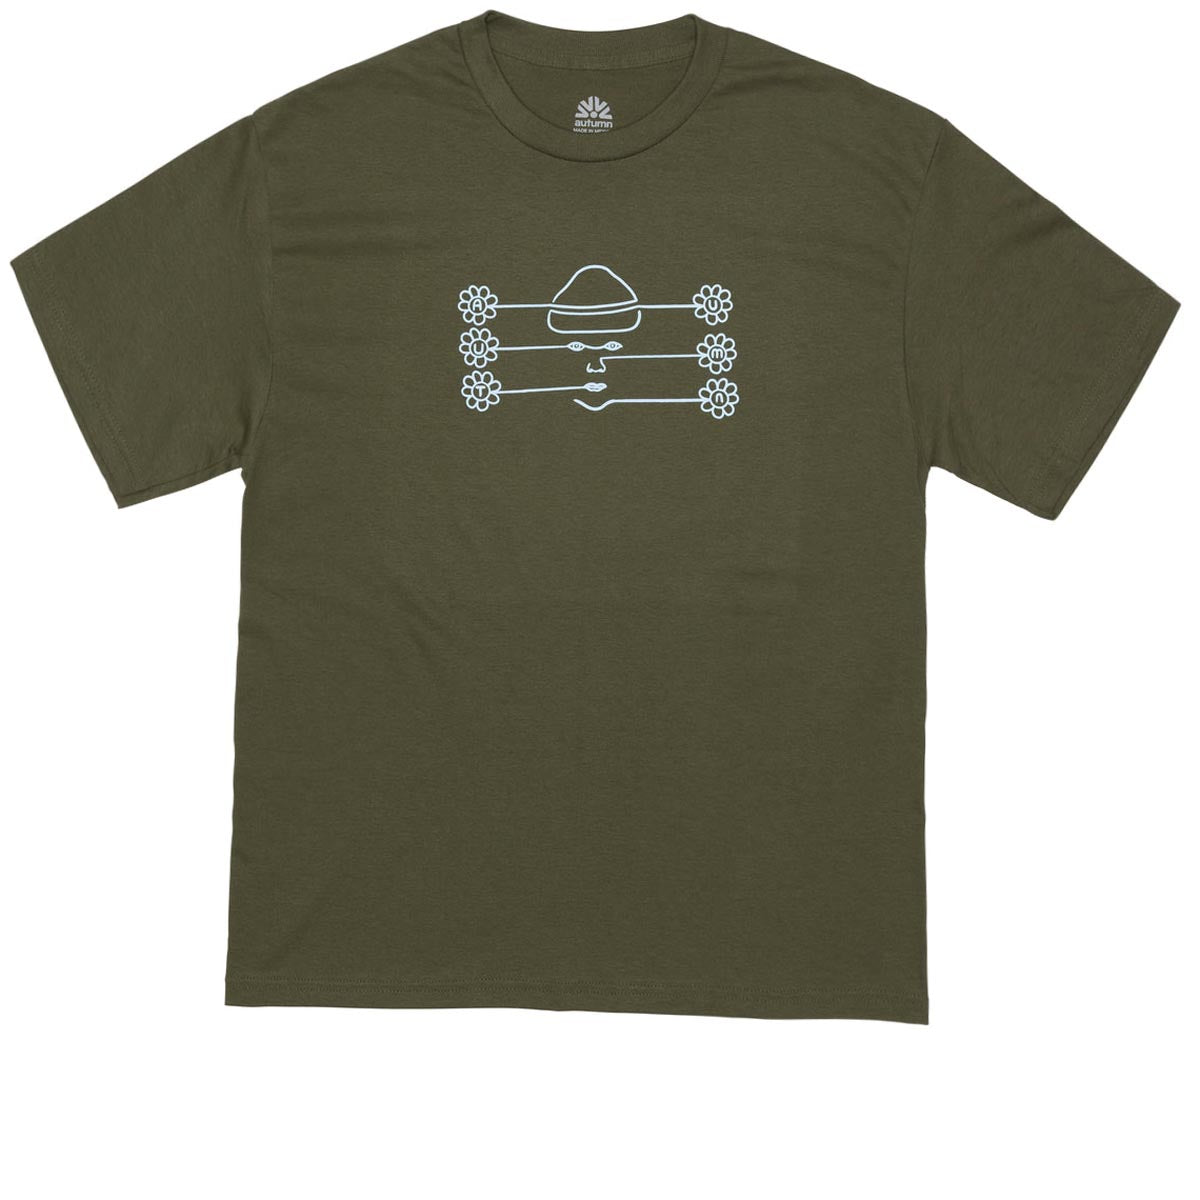 Autumn Bloom Shirt - Army Green image 1